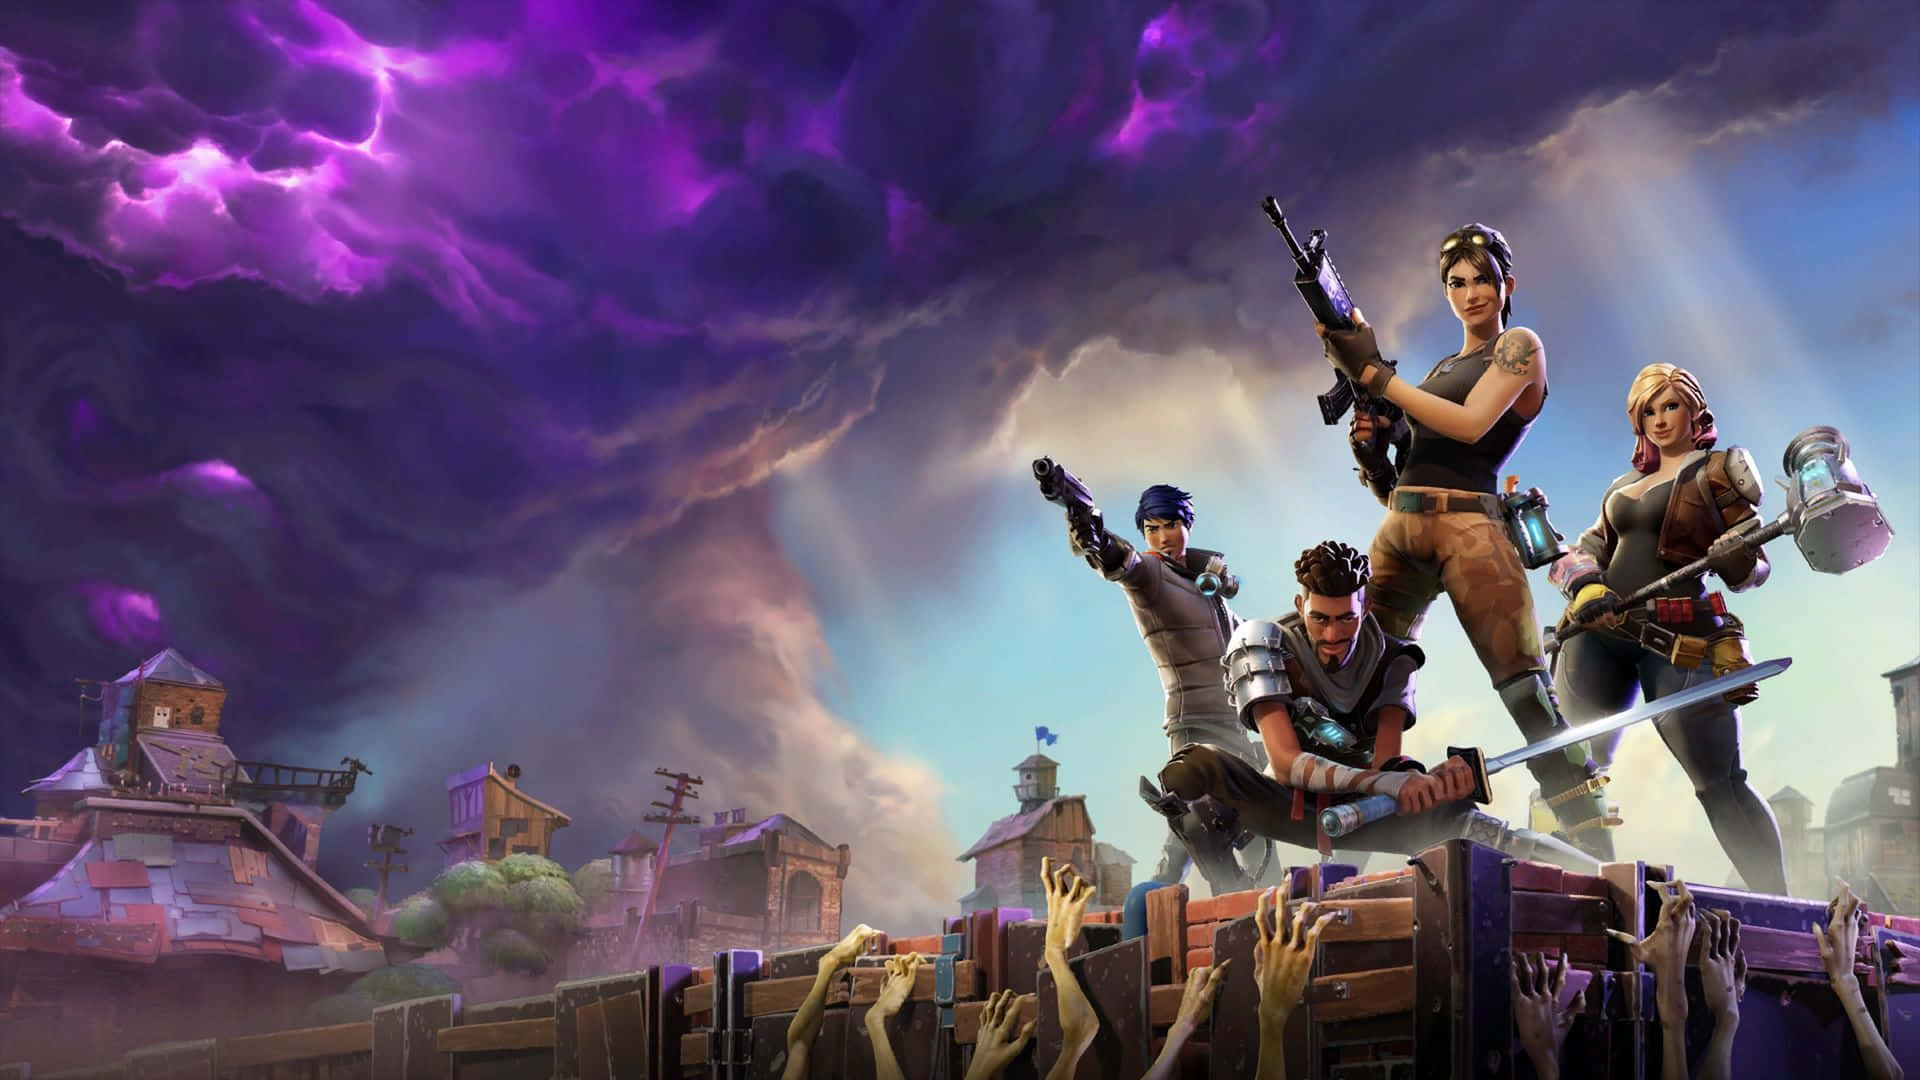 Intense Fortnite Battle Royale action in a captivating gaming environment